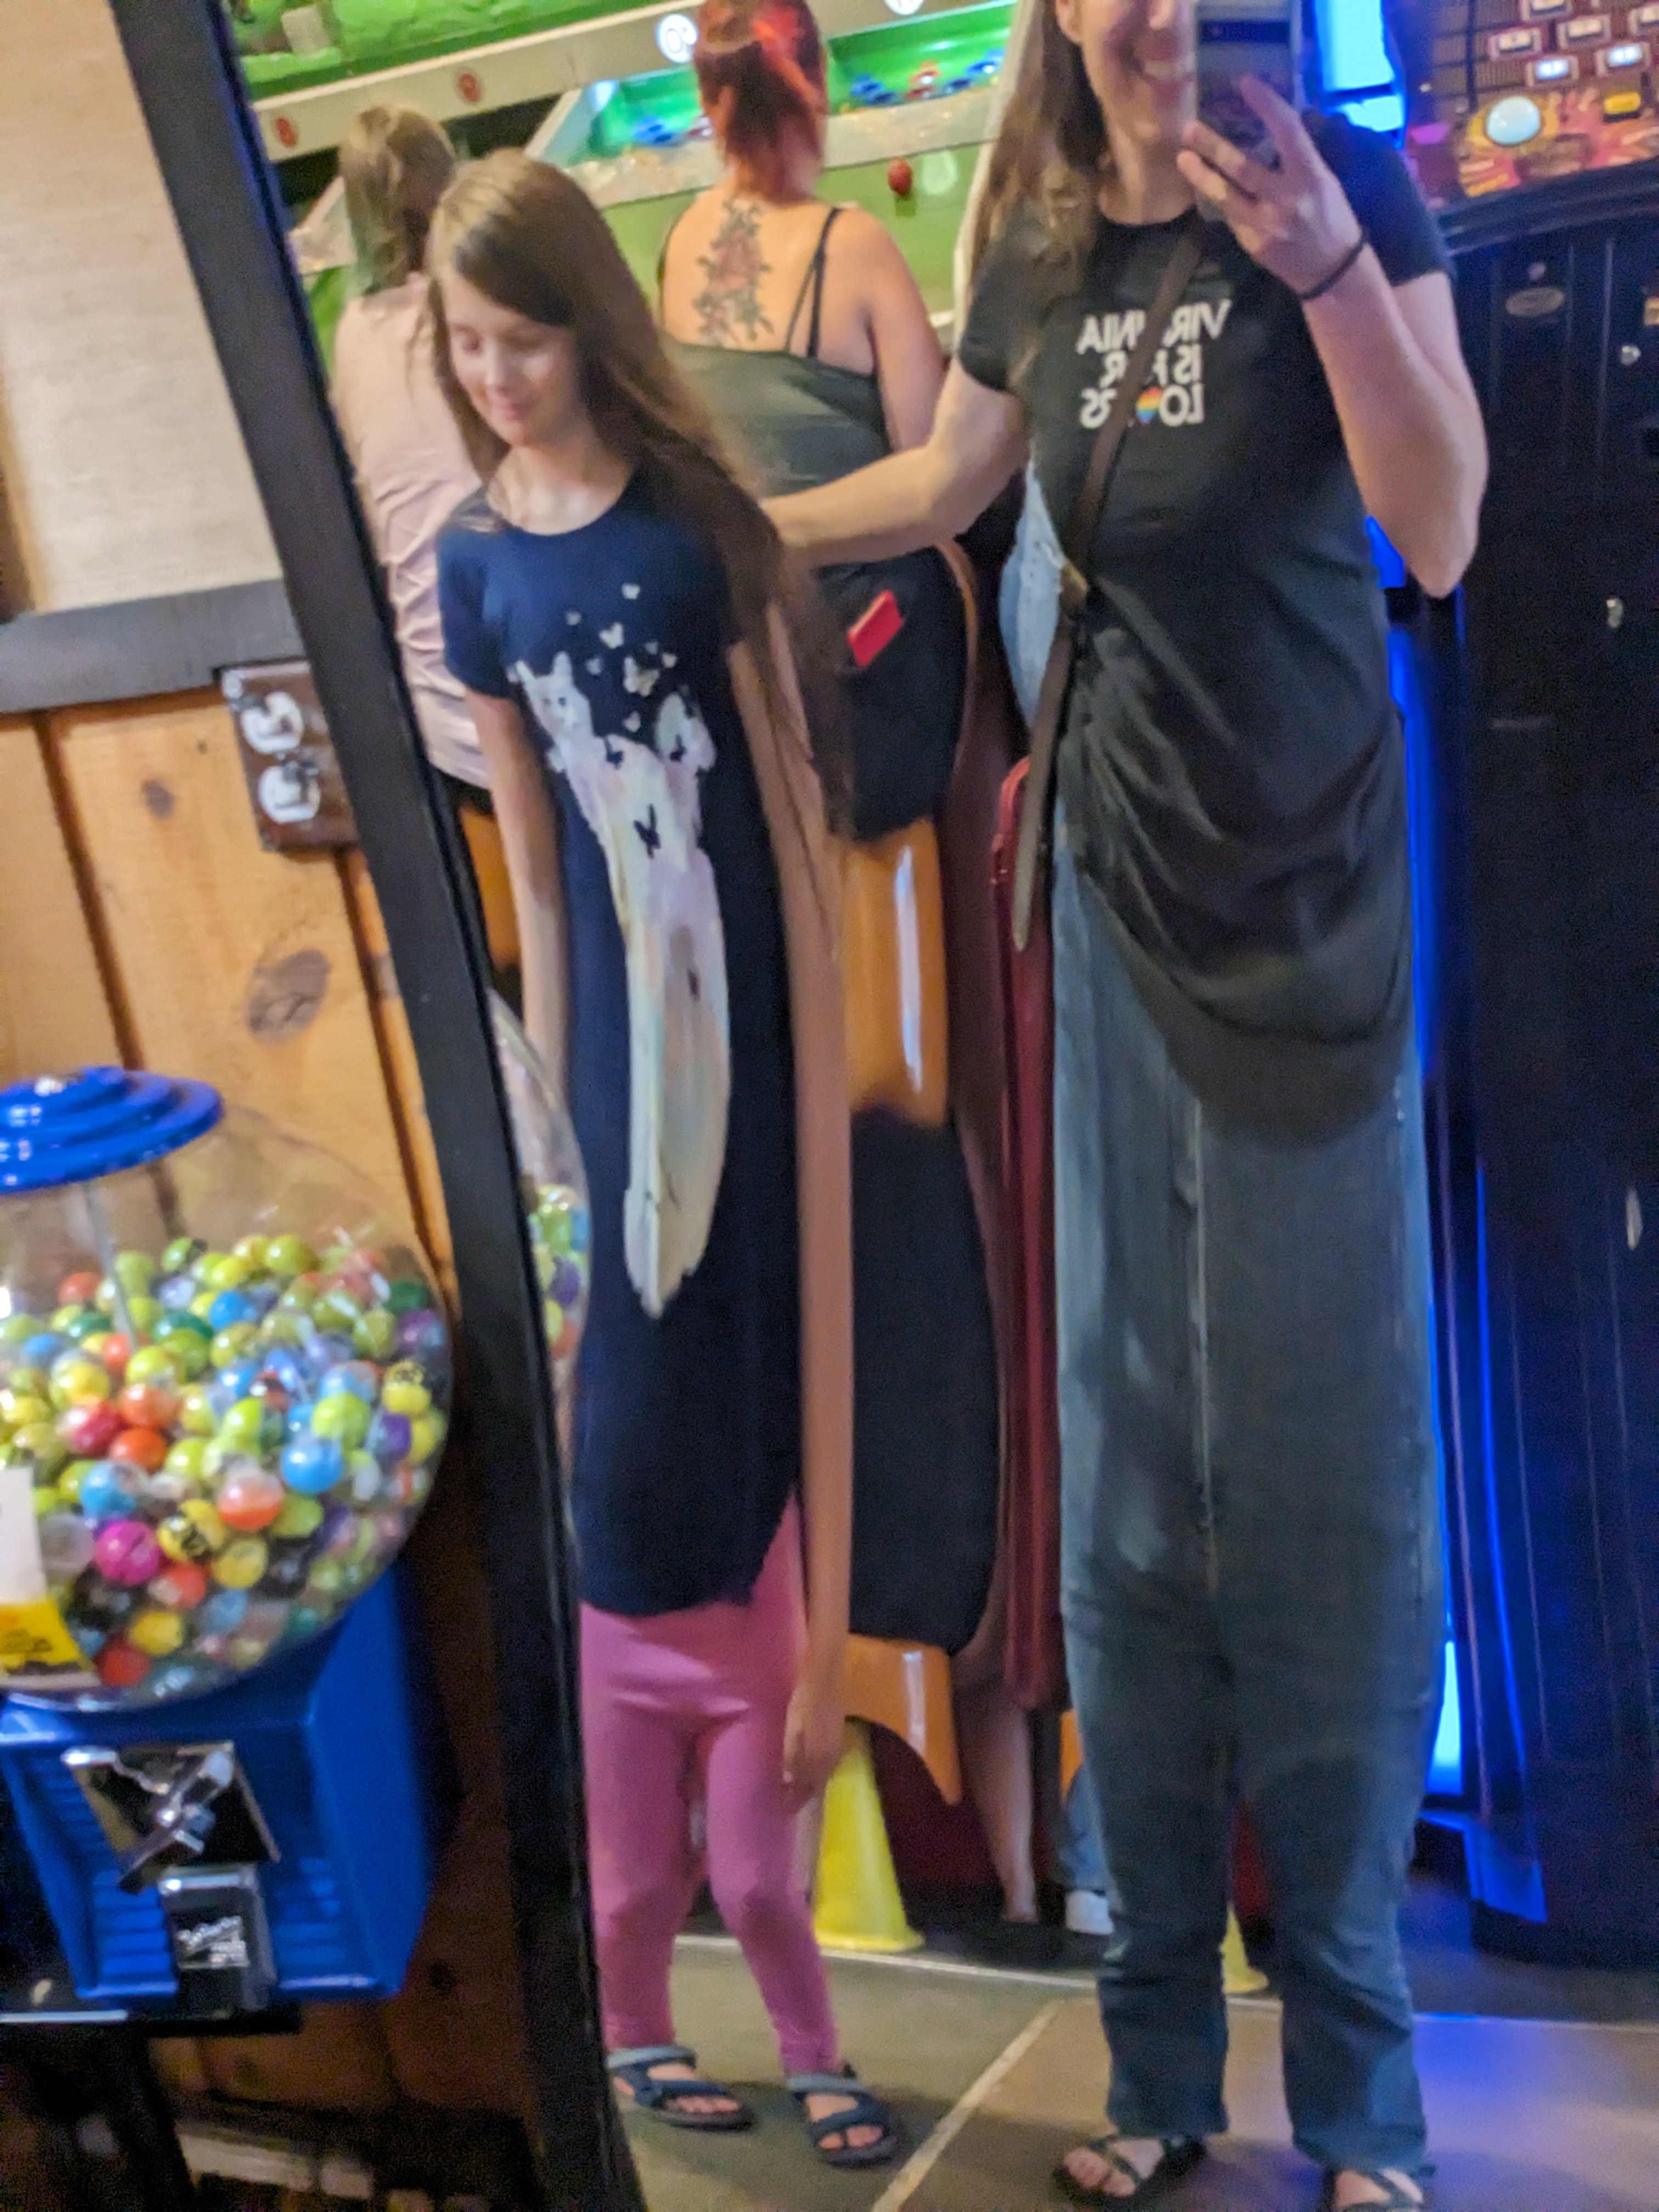 Aili and Petra distorted in a funhouse mirror